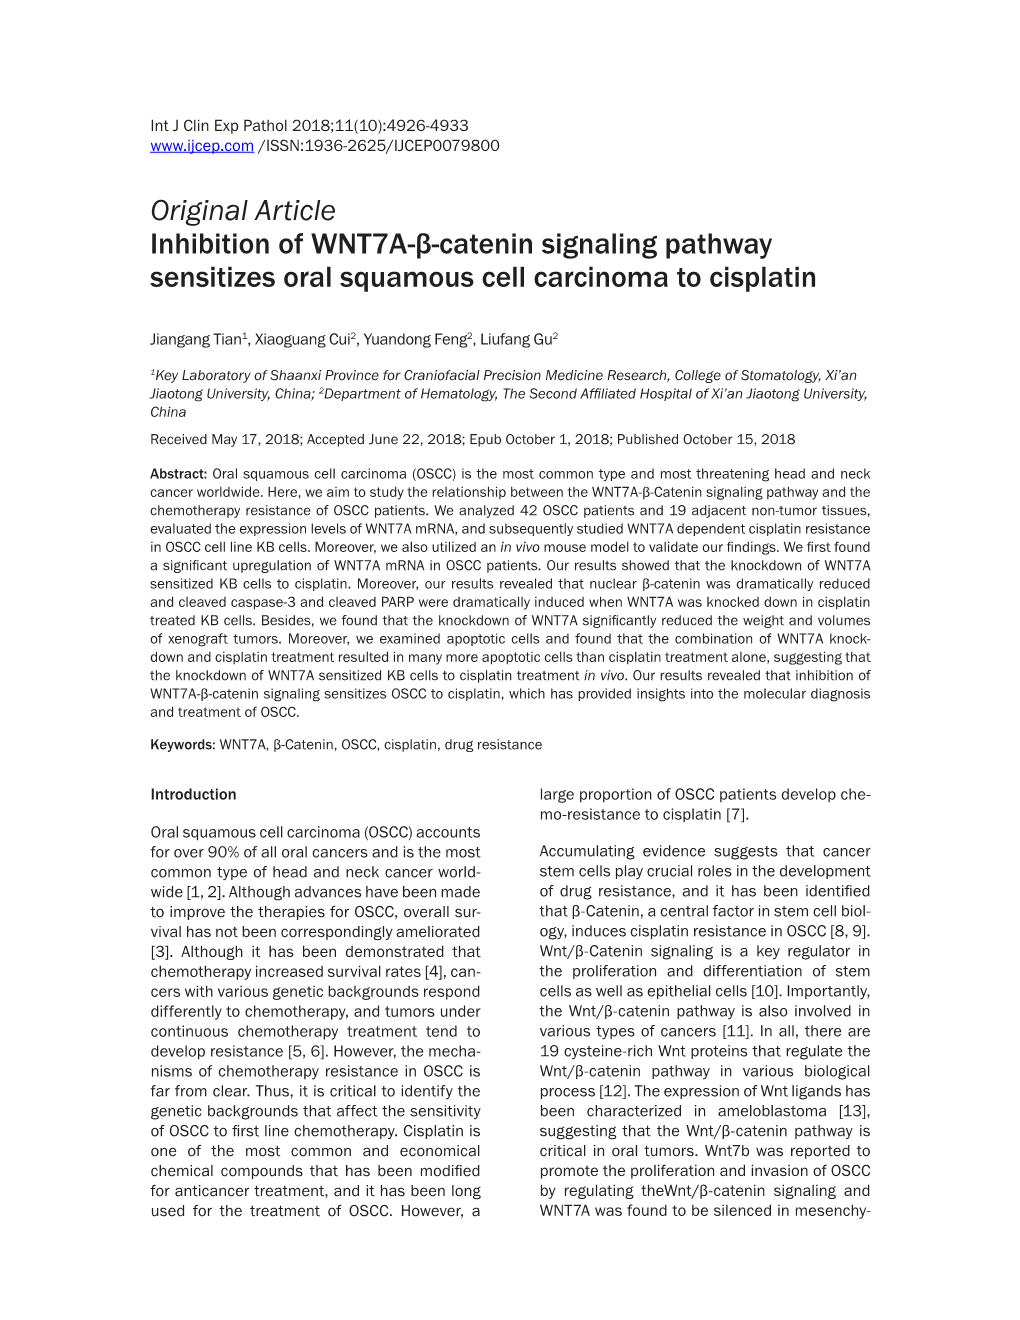 Original Article Inhibition of WNT7A-Β-Catenin Signaling Pathway Sensitizes Oral Squamous Cell Carcinoma to Cisplatin